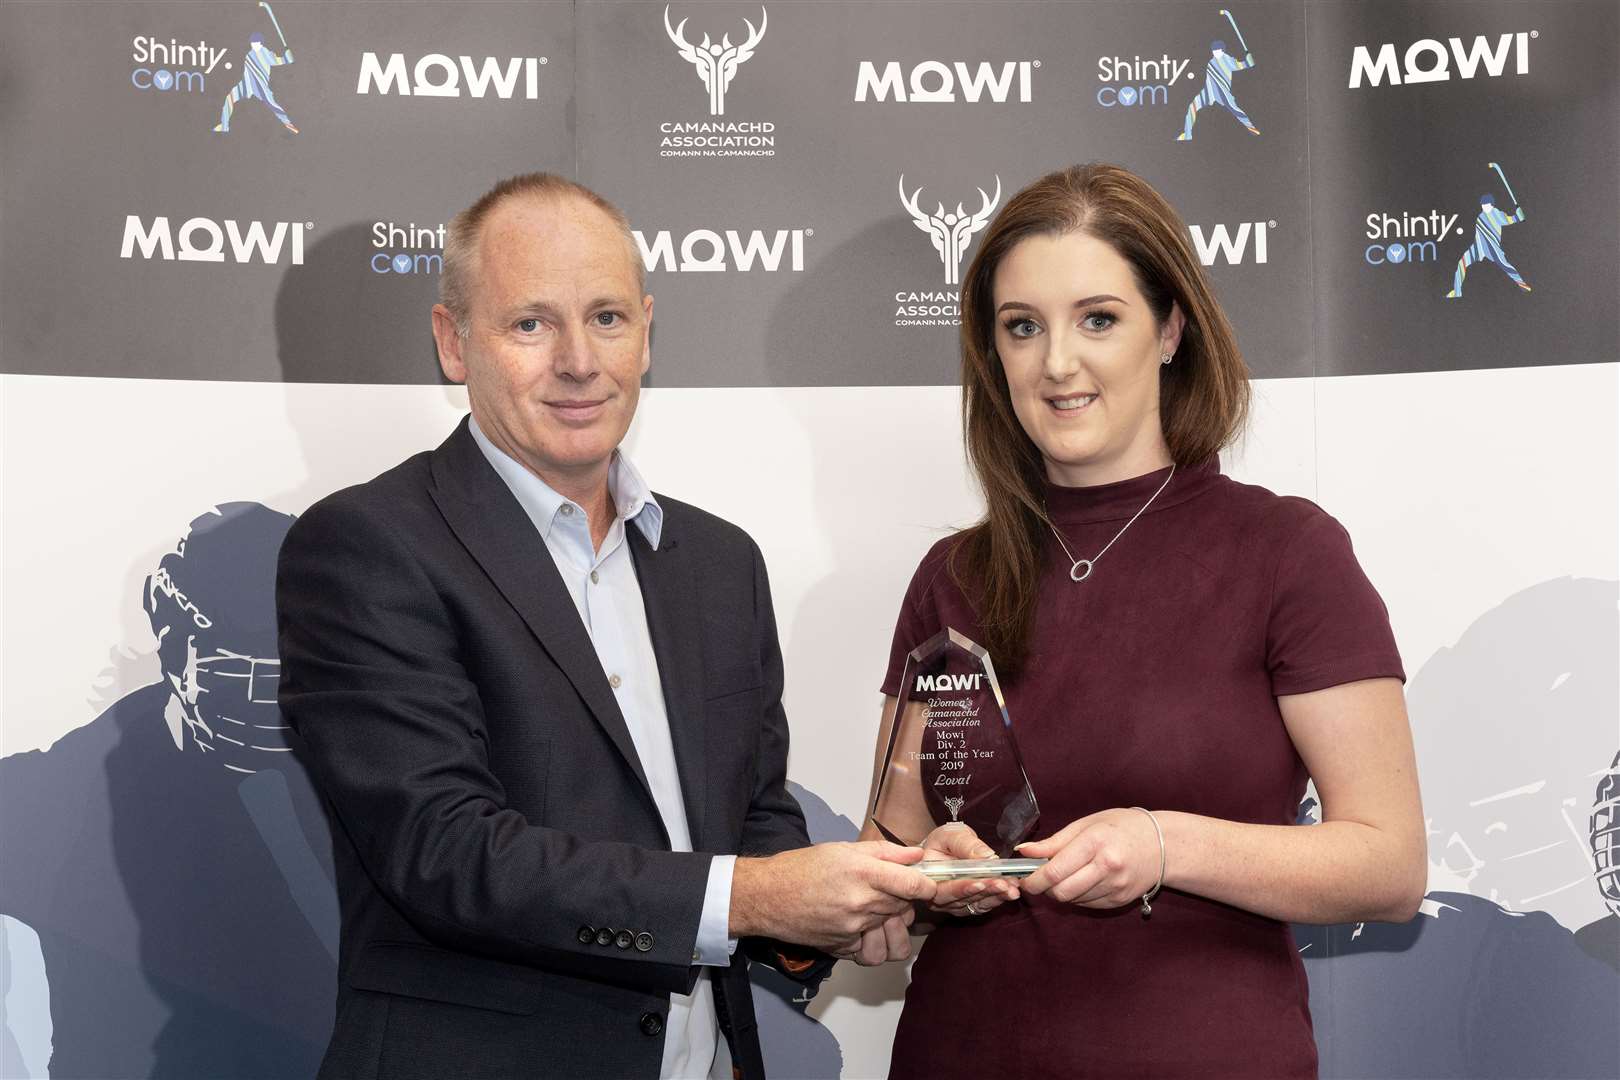 WCA North Div. 2 Team of the Year - Lovat - collected by Caroline MacLean who receives the award from Mowi’s Angus Mackay. Mowi Shinty Awards Luncheon and Conference at The Kingsmills Hotel, Inverness.